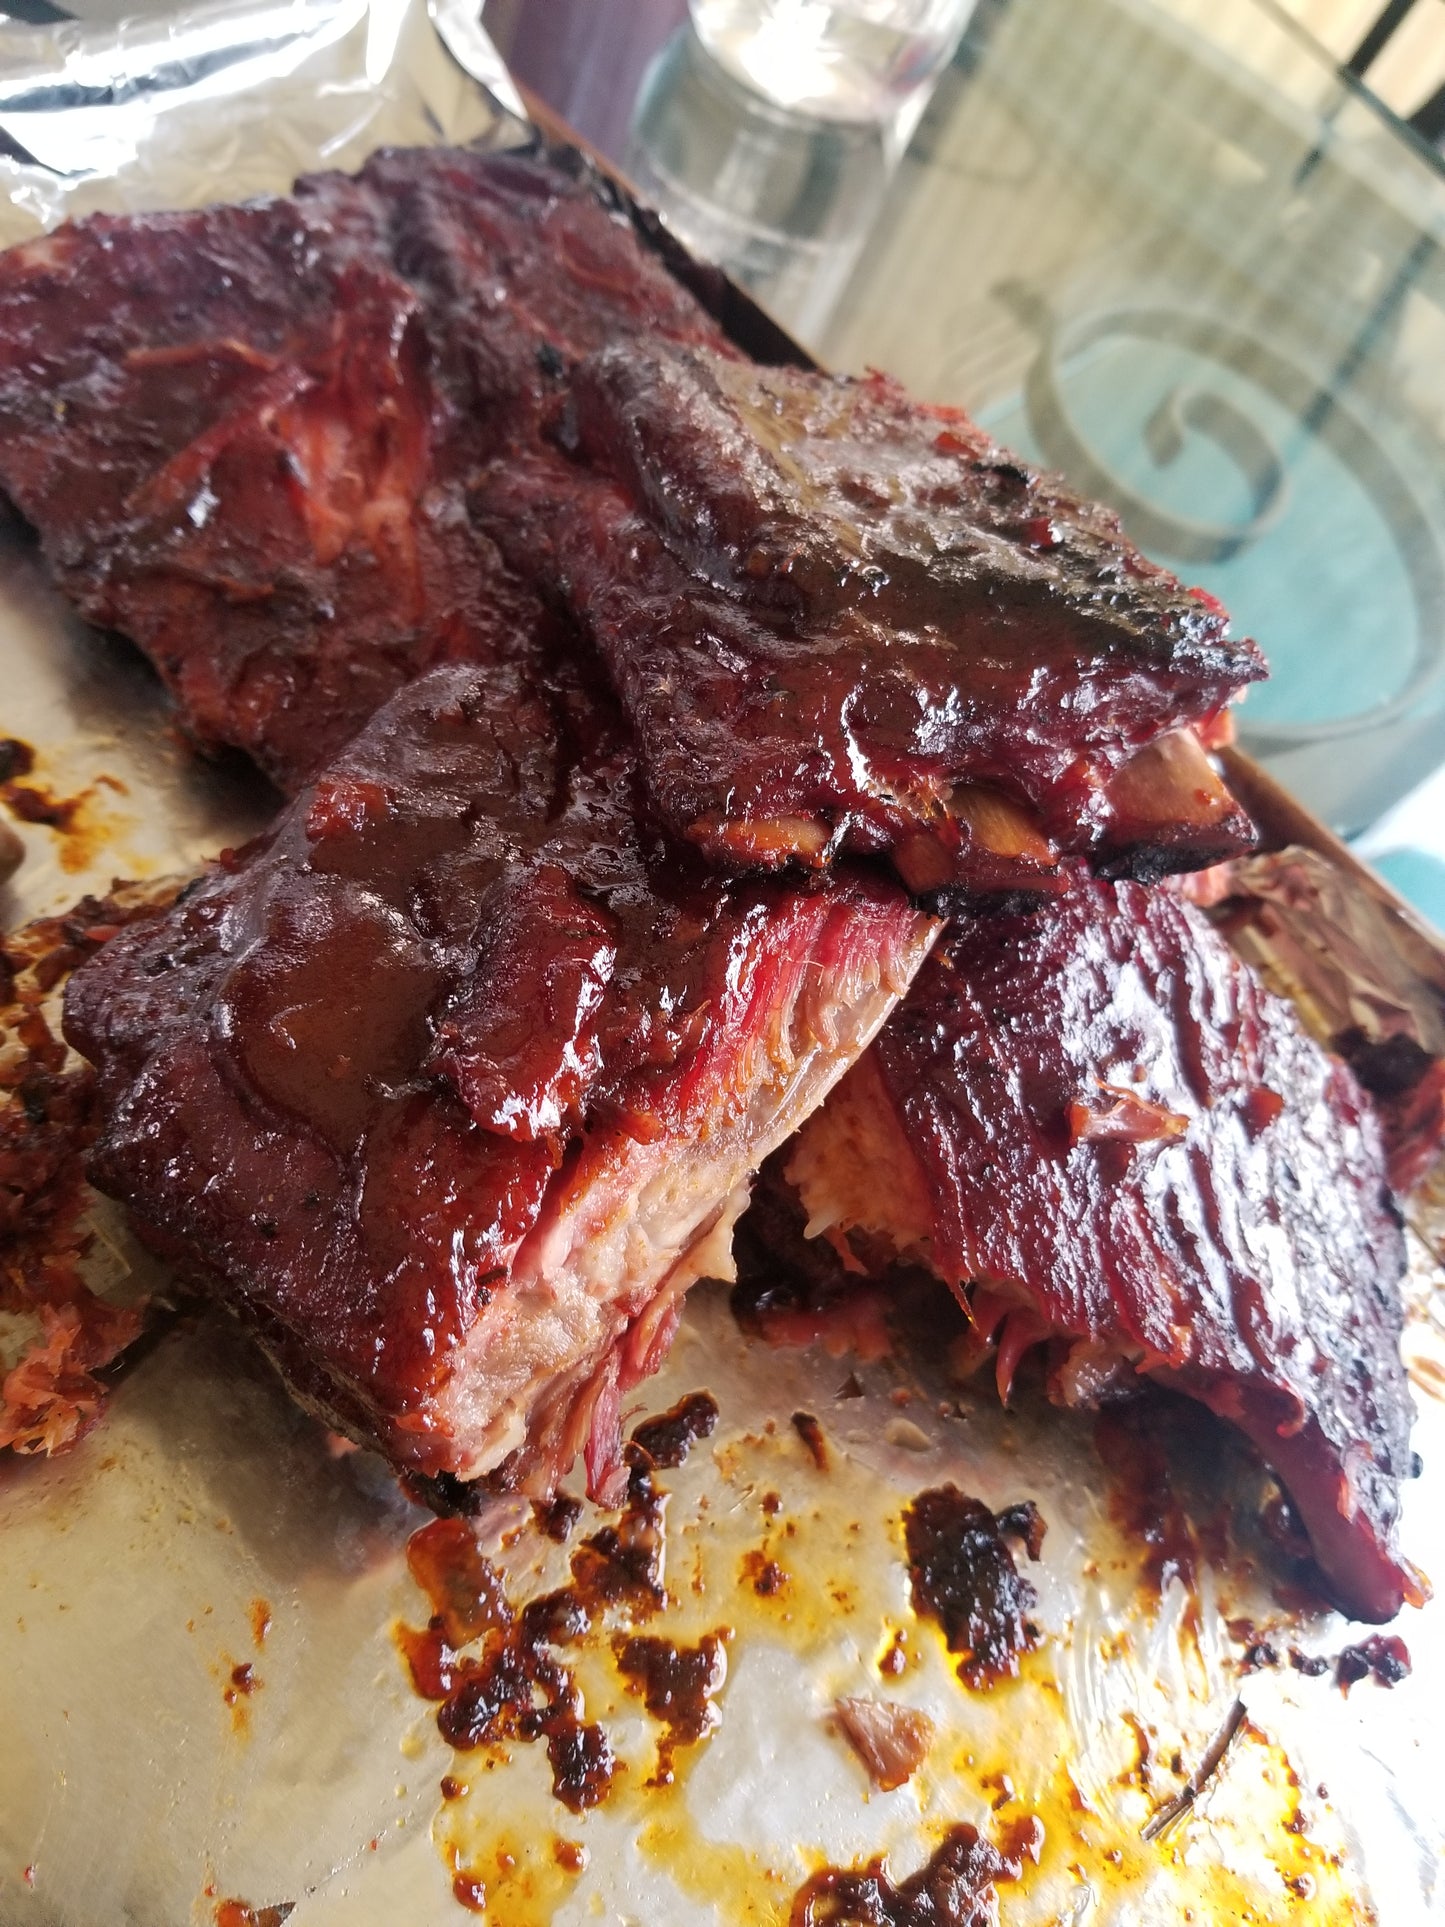 Delicious BBQ ribs being grilled to perfection on an outdoor barbecue. The meat is beautifully charred and covered in a flavorful sauce. A plume of mouthwatering smoke rises from the grill. Perfect BBQ for a summer gathering.